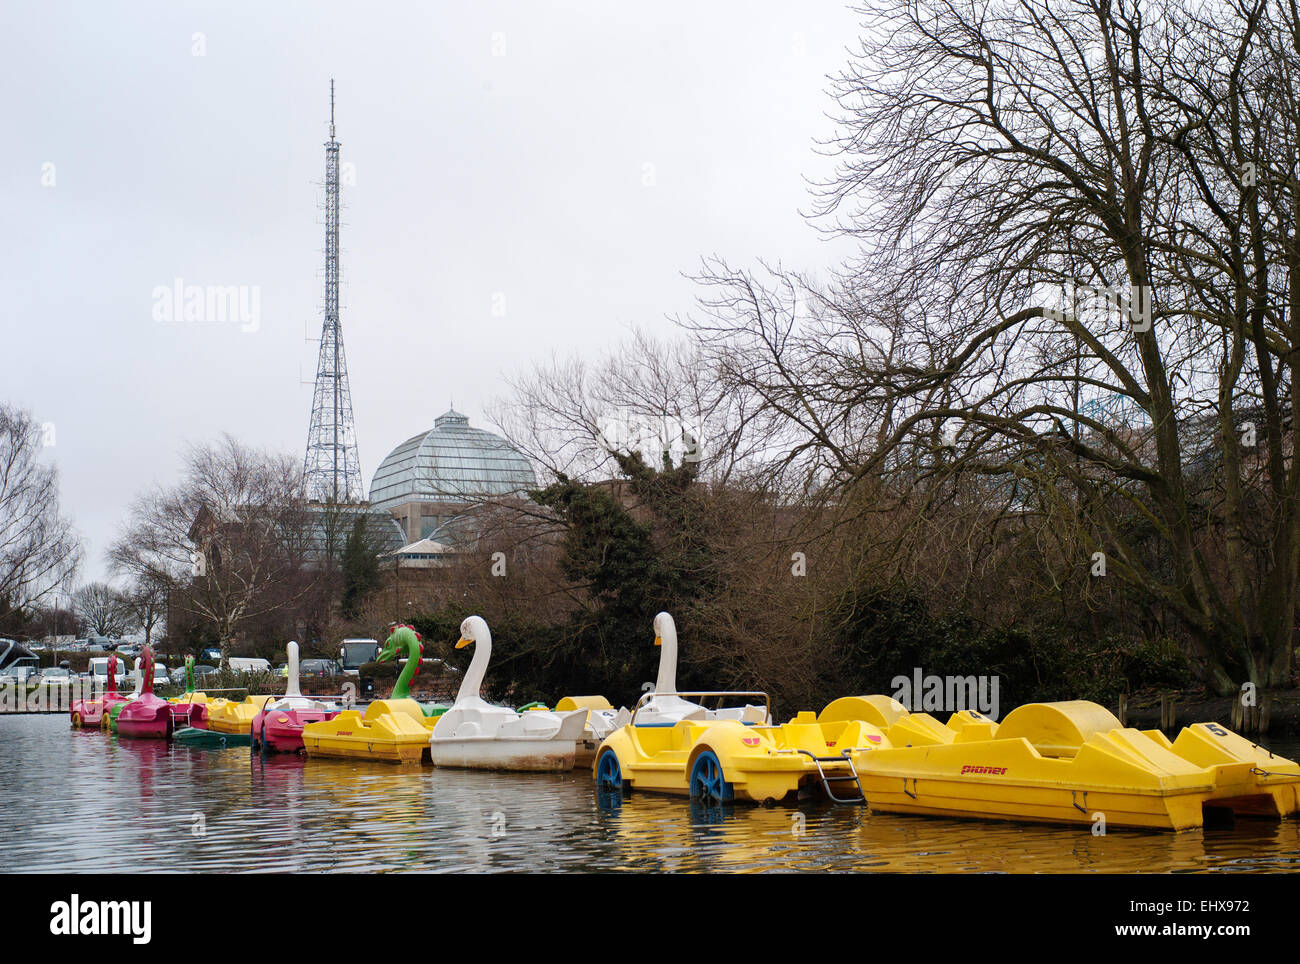 Boating Lake , swan and Pedalo rides with Alexandra Palace and the BBC Tower and Transmitter Mast in background Stock Photo